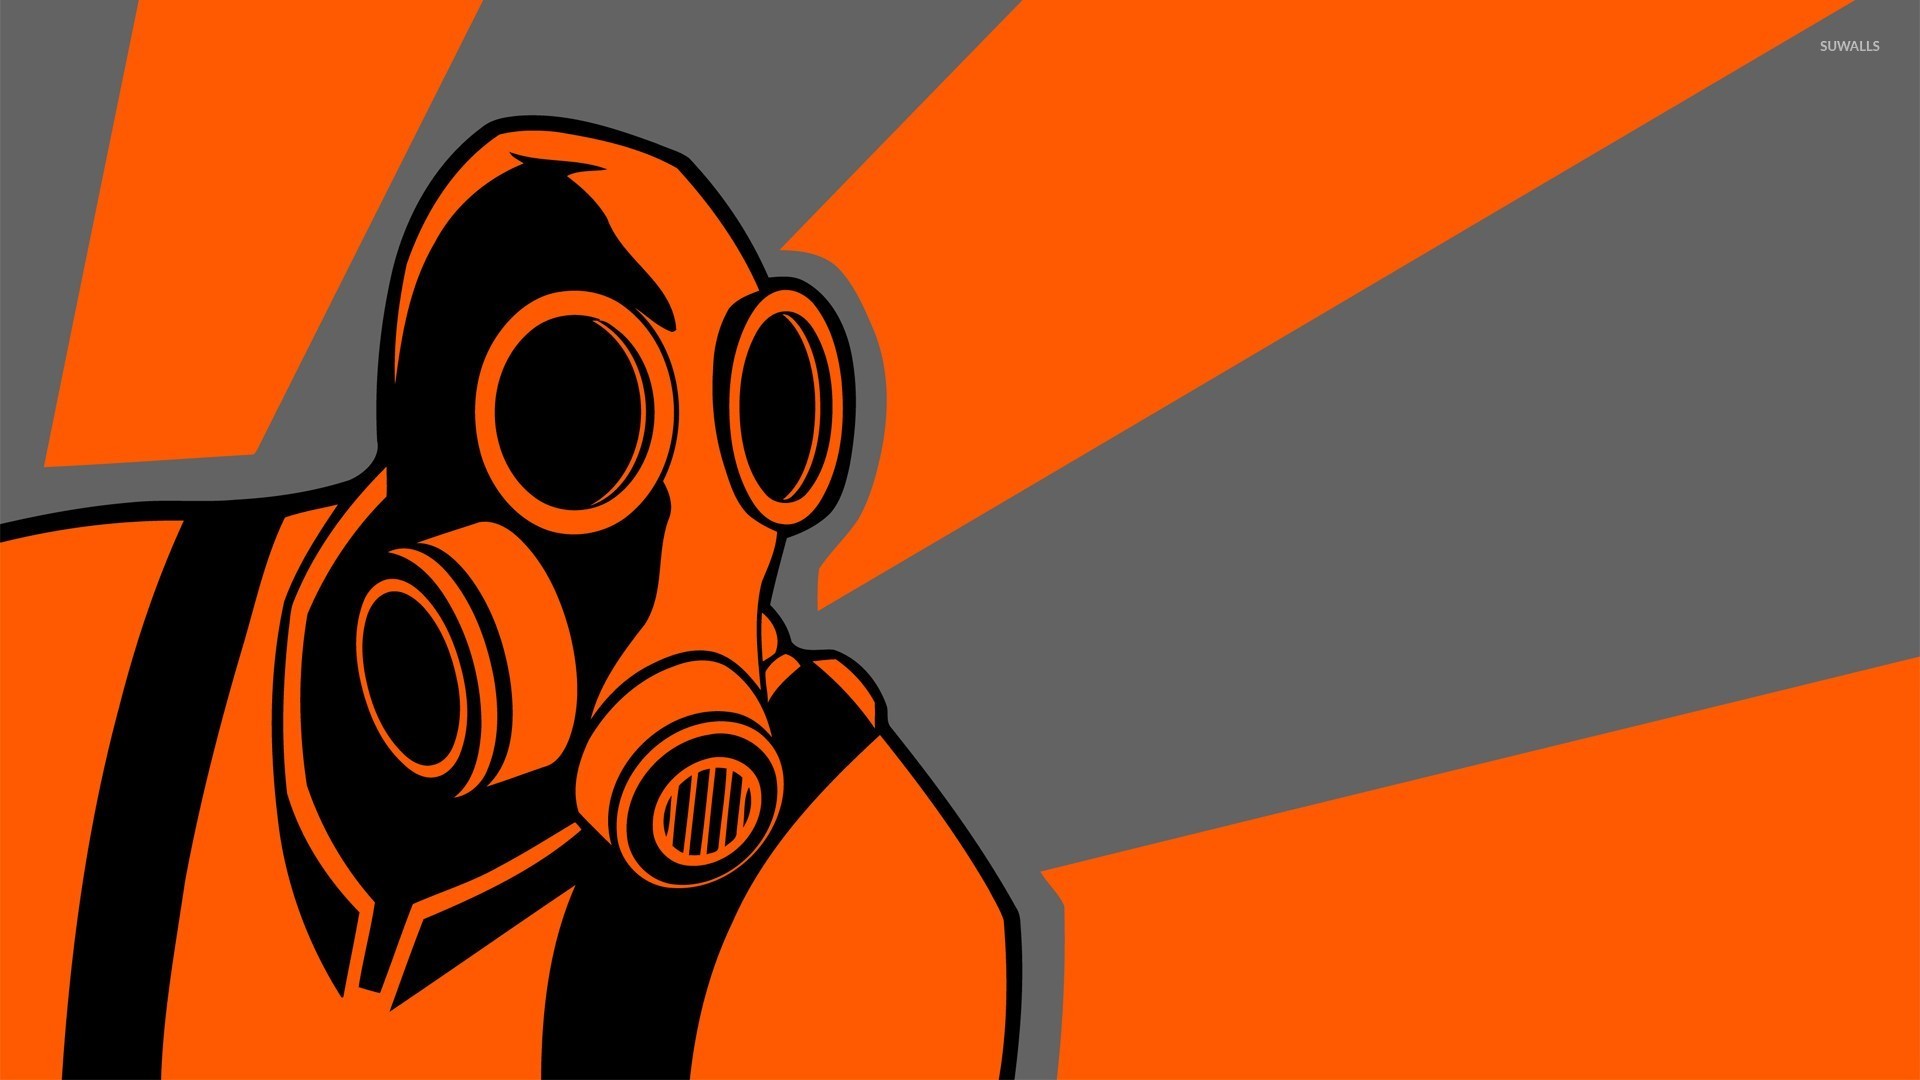 Pyro Team Fortress Wallpaper Game